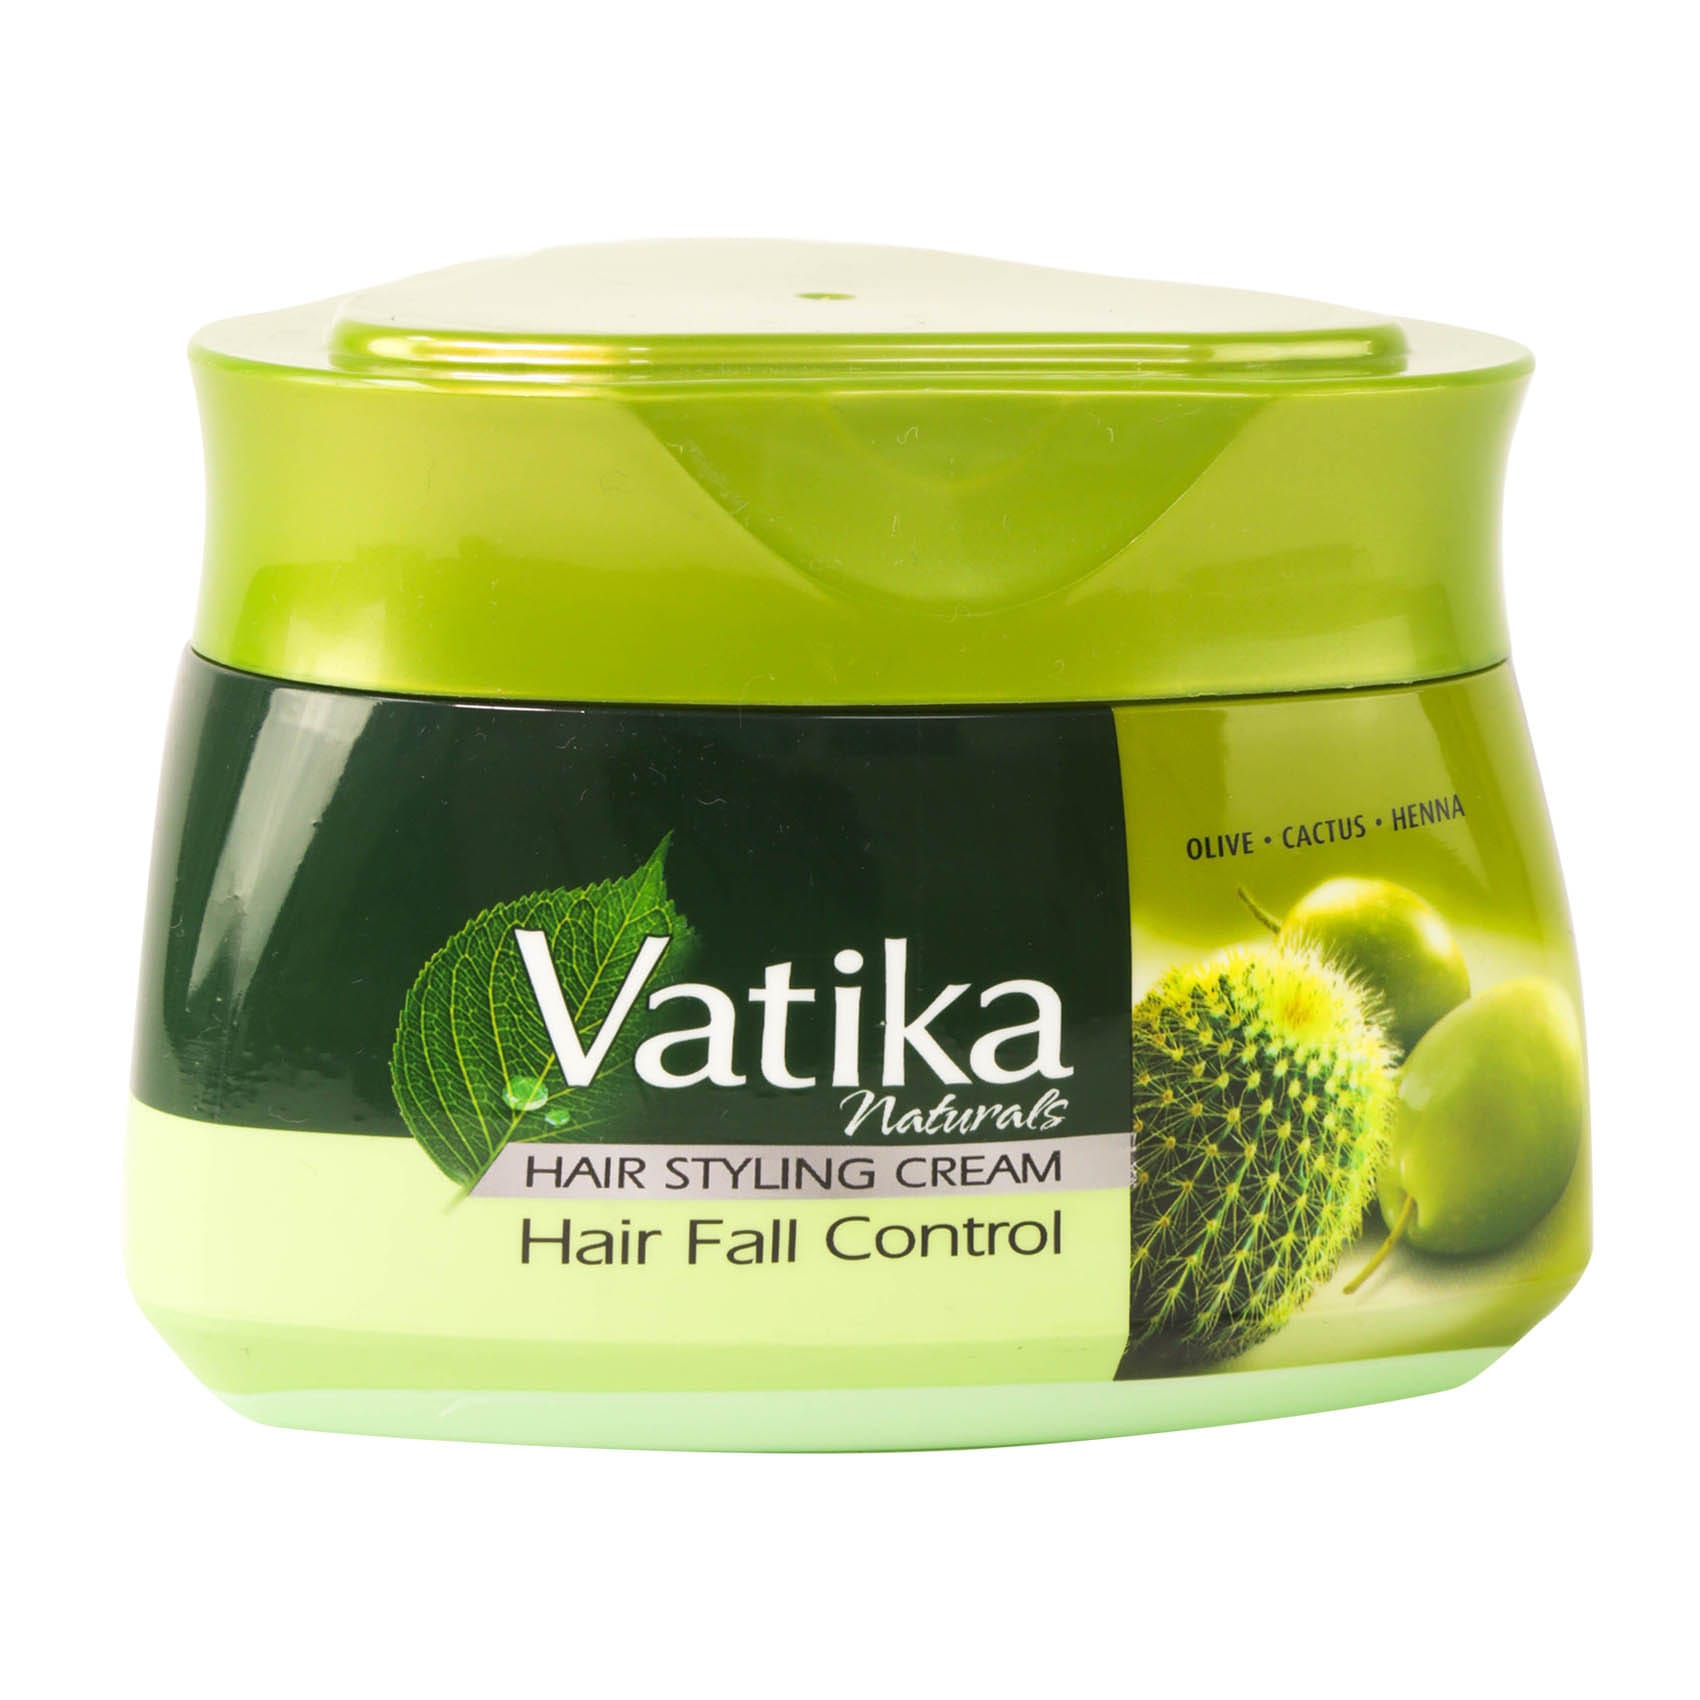 Buy Vatika Naturals Hair Styling Cream Hair Fall Control 210ml Online Shop Beauty Personal Care On Carrefour Uae